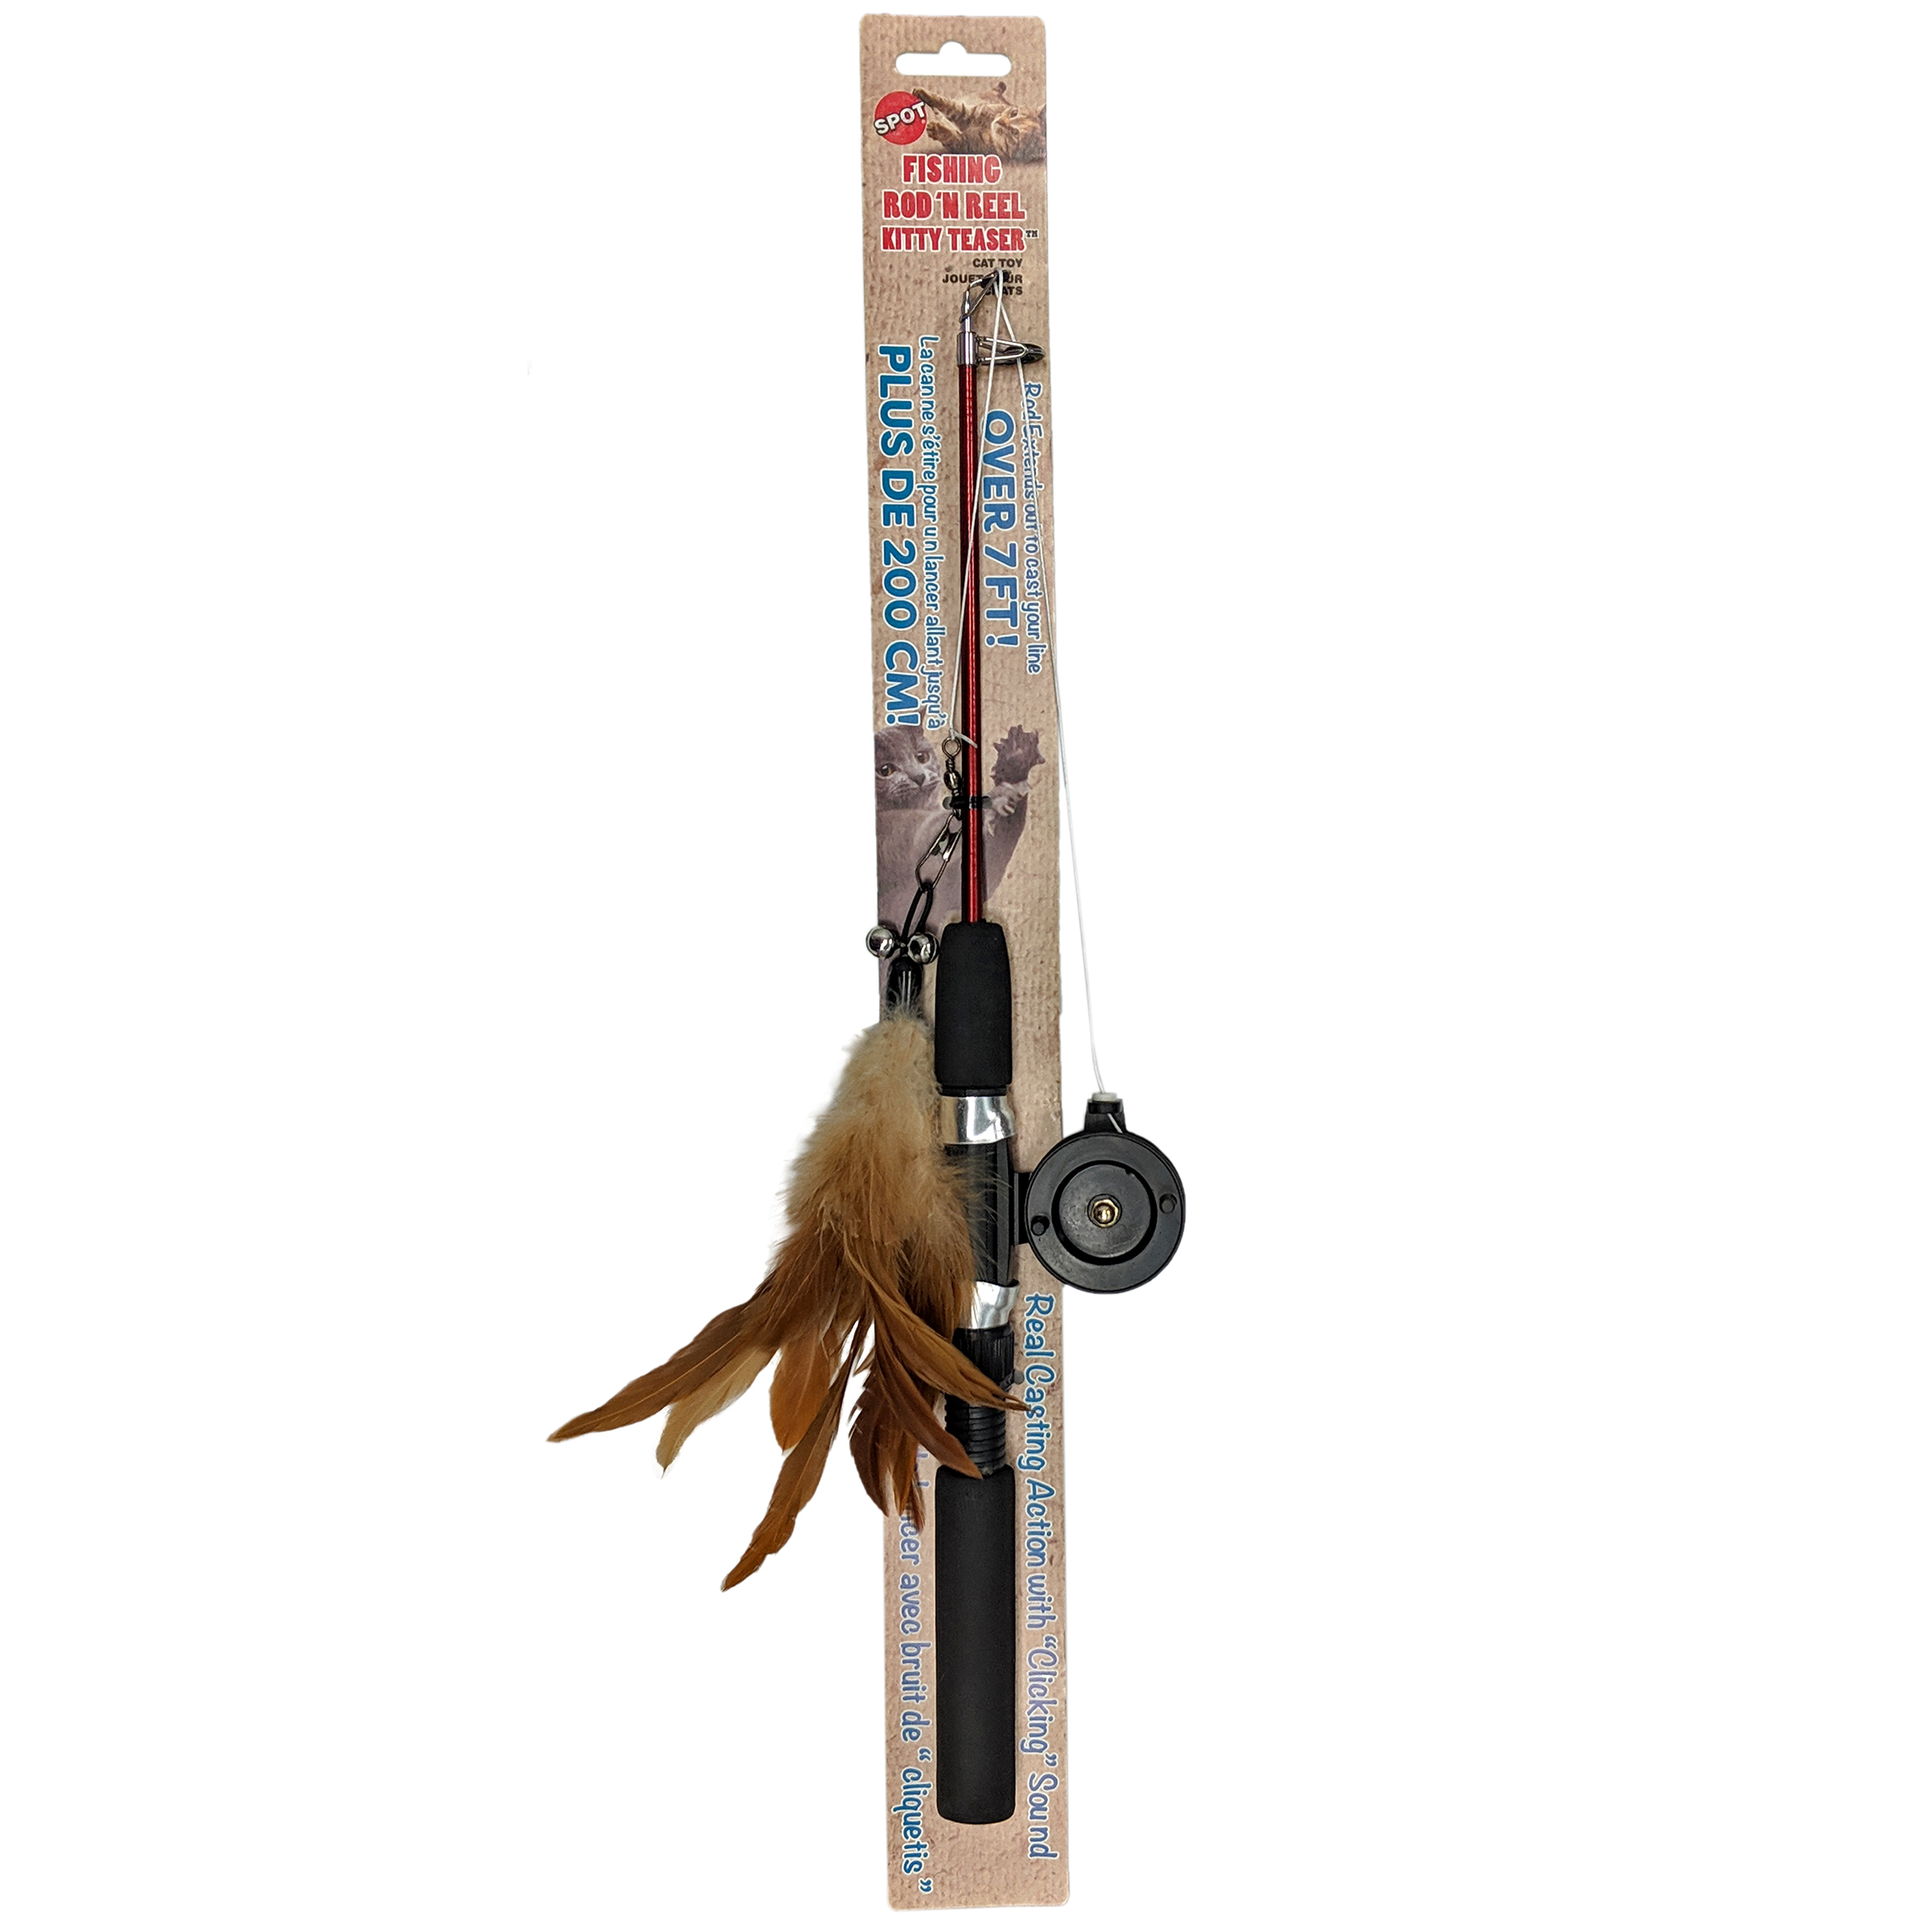  Cat Caster Fishing Pole Toy